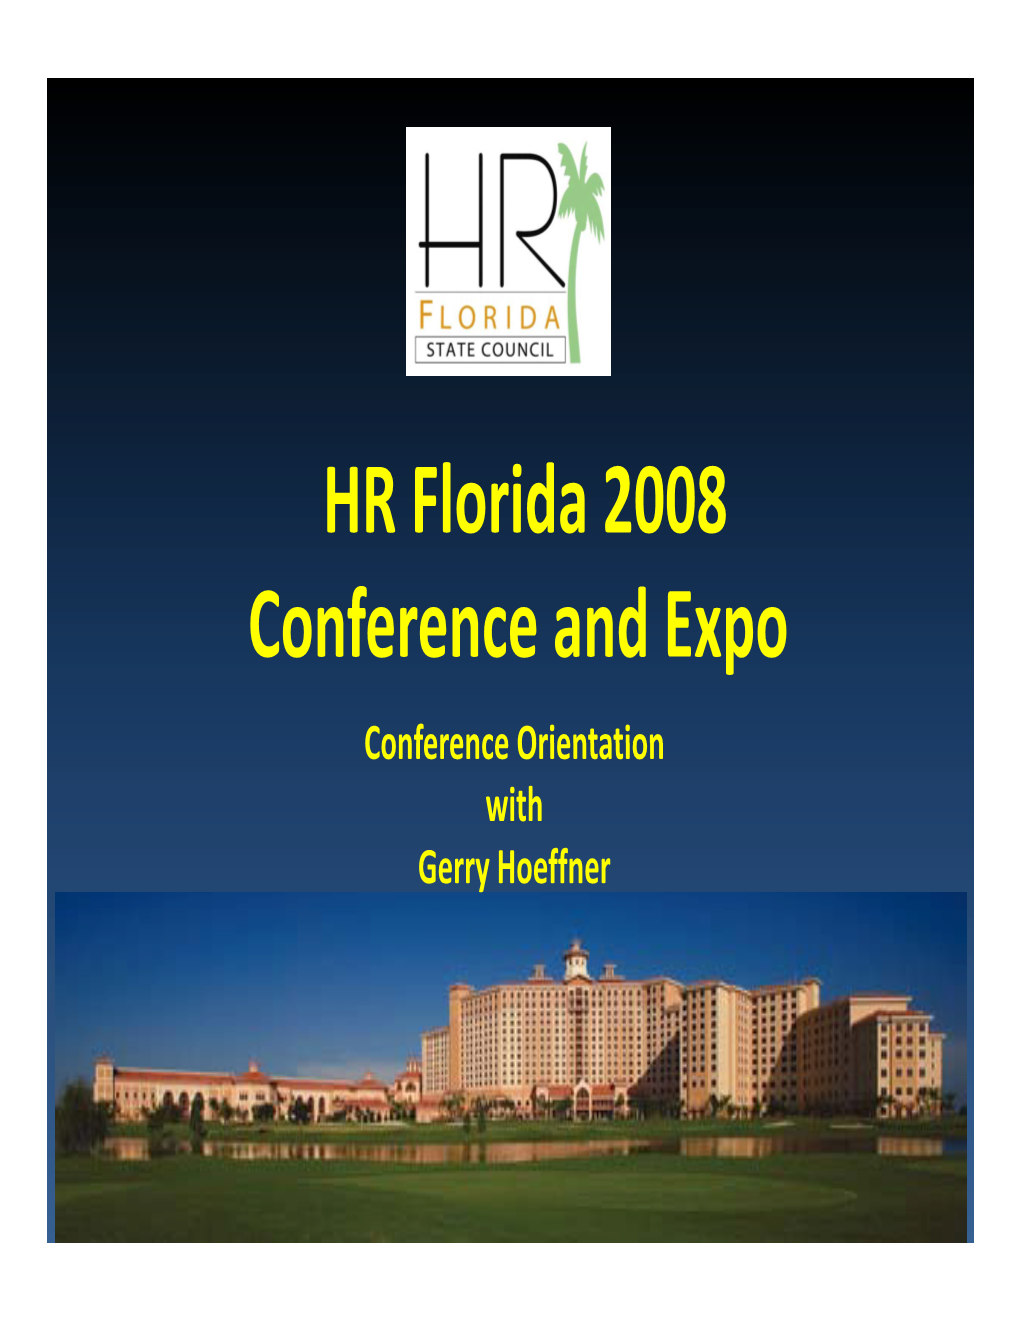 HR Florida 2008 Conference and Expo Conference Orientation with Gerry Hoeffner WELCOME to HR Fldlorida 2008 Conf Erence and Expo